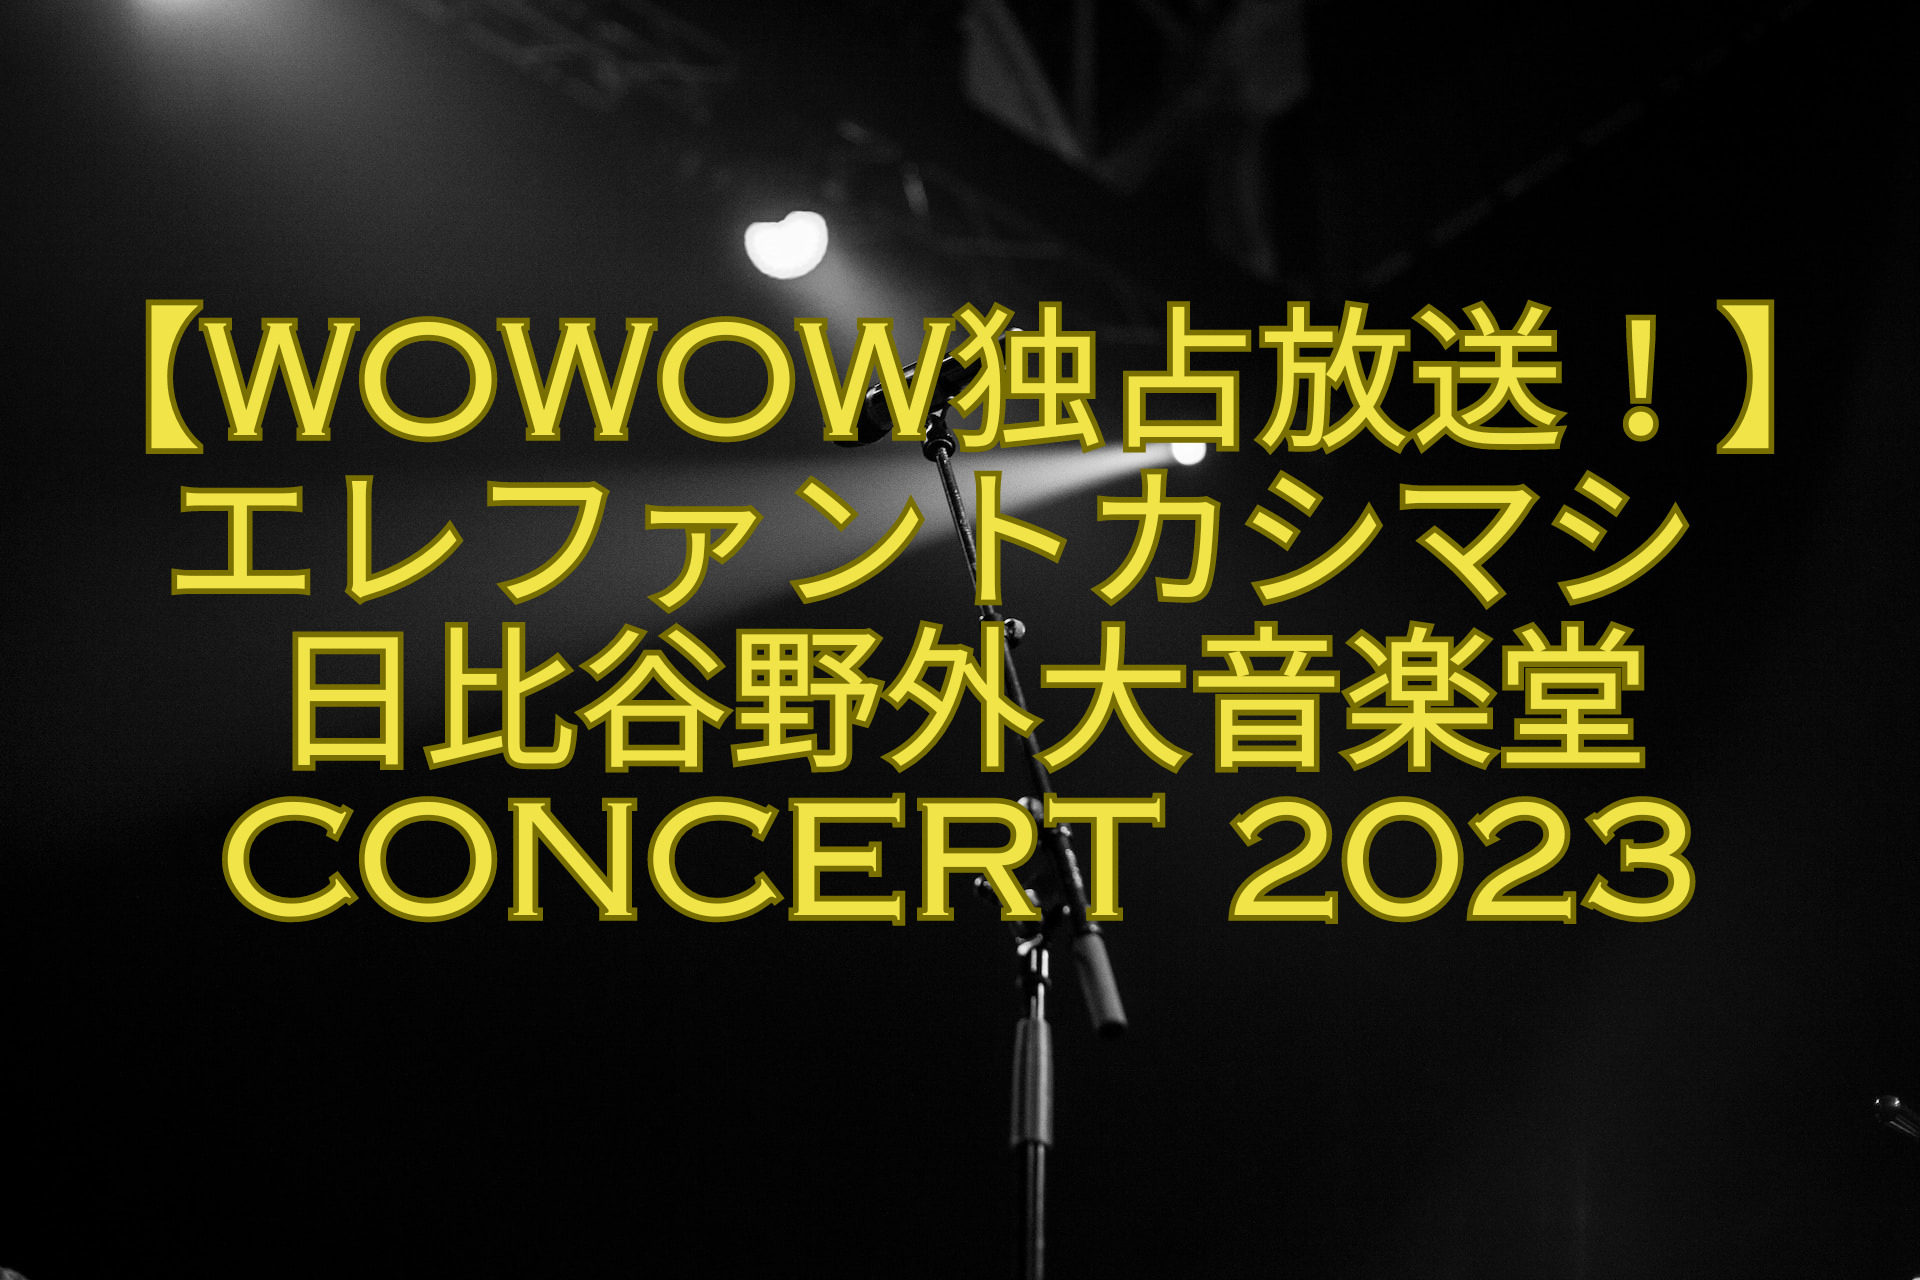 【WOWOW独占放送！】エレファントカシマシ-日比谷野外大音楽堂-concert-2023